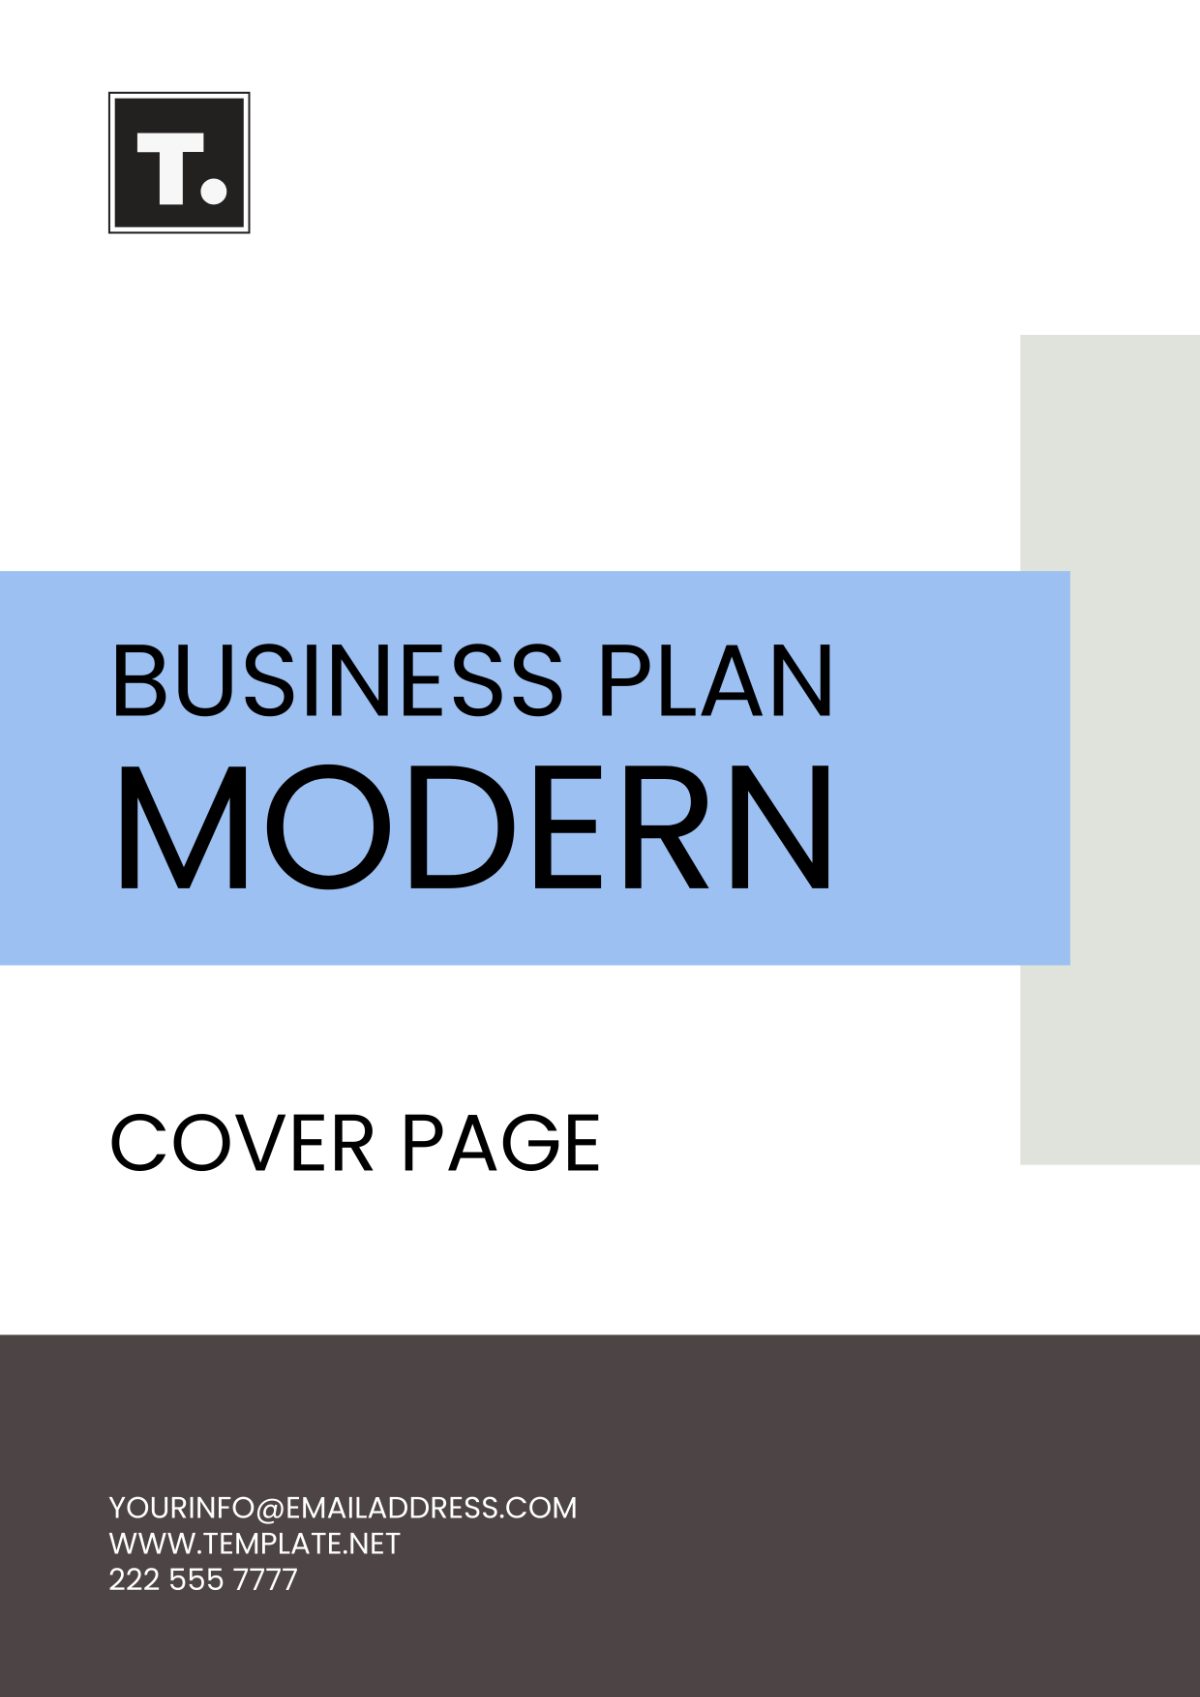 Business Plan Modern Cover Page